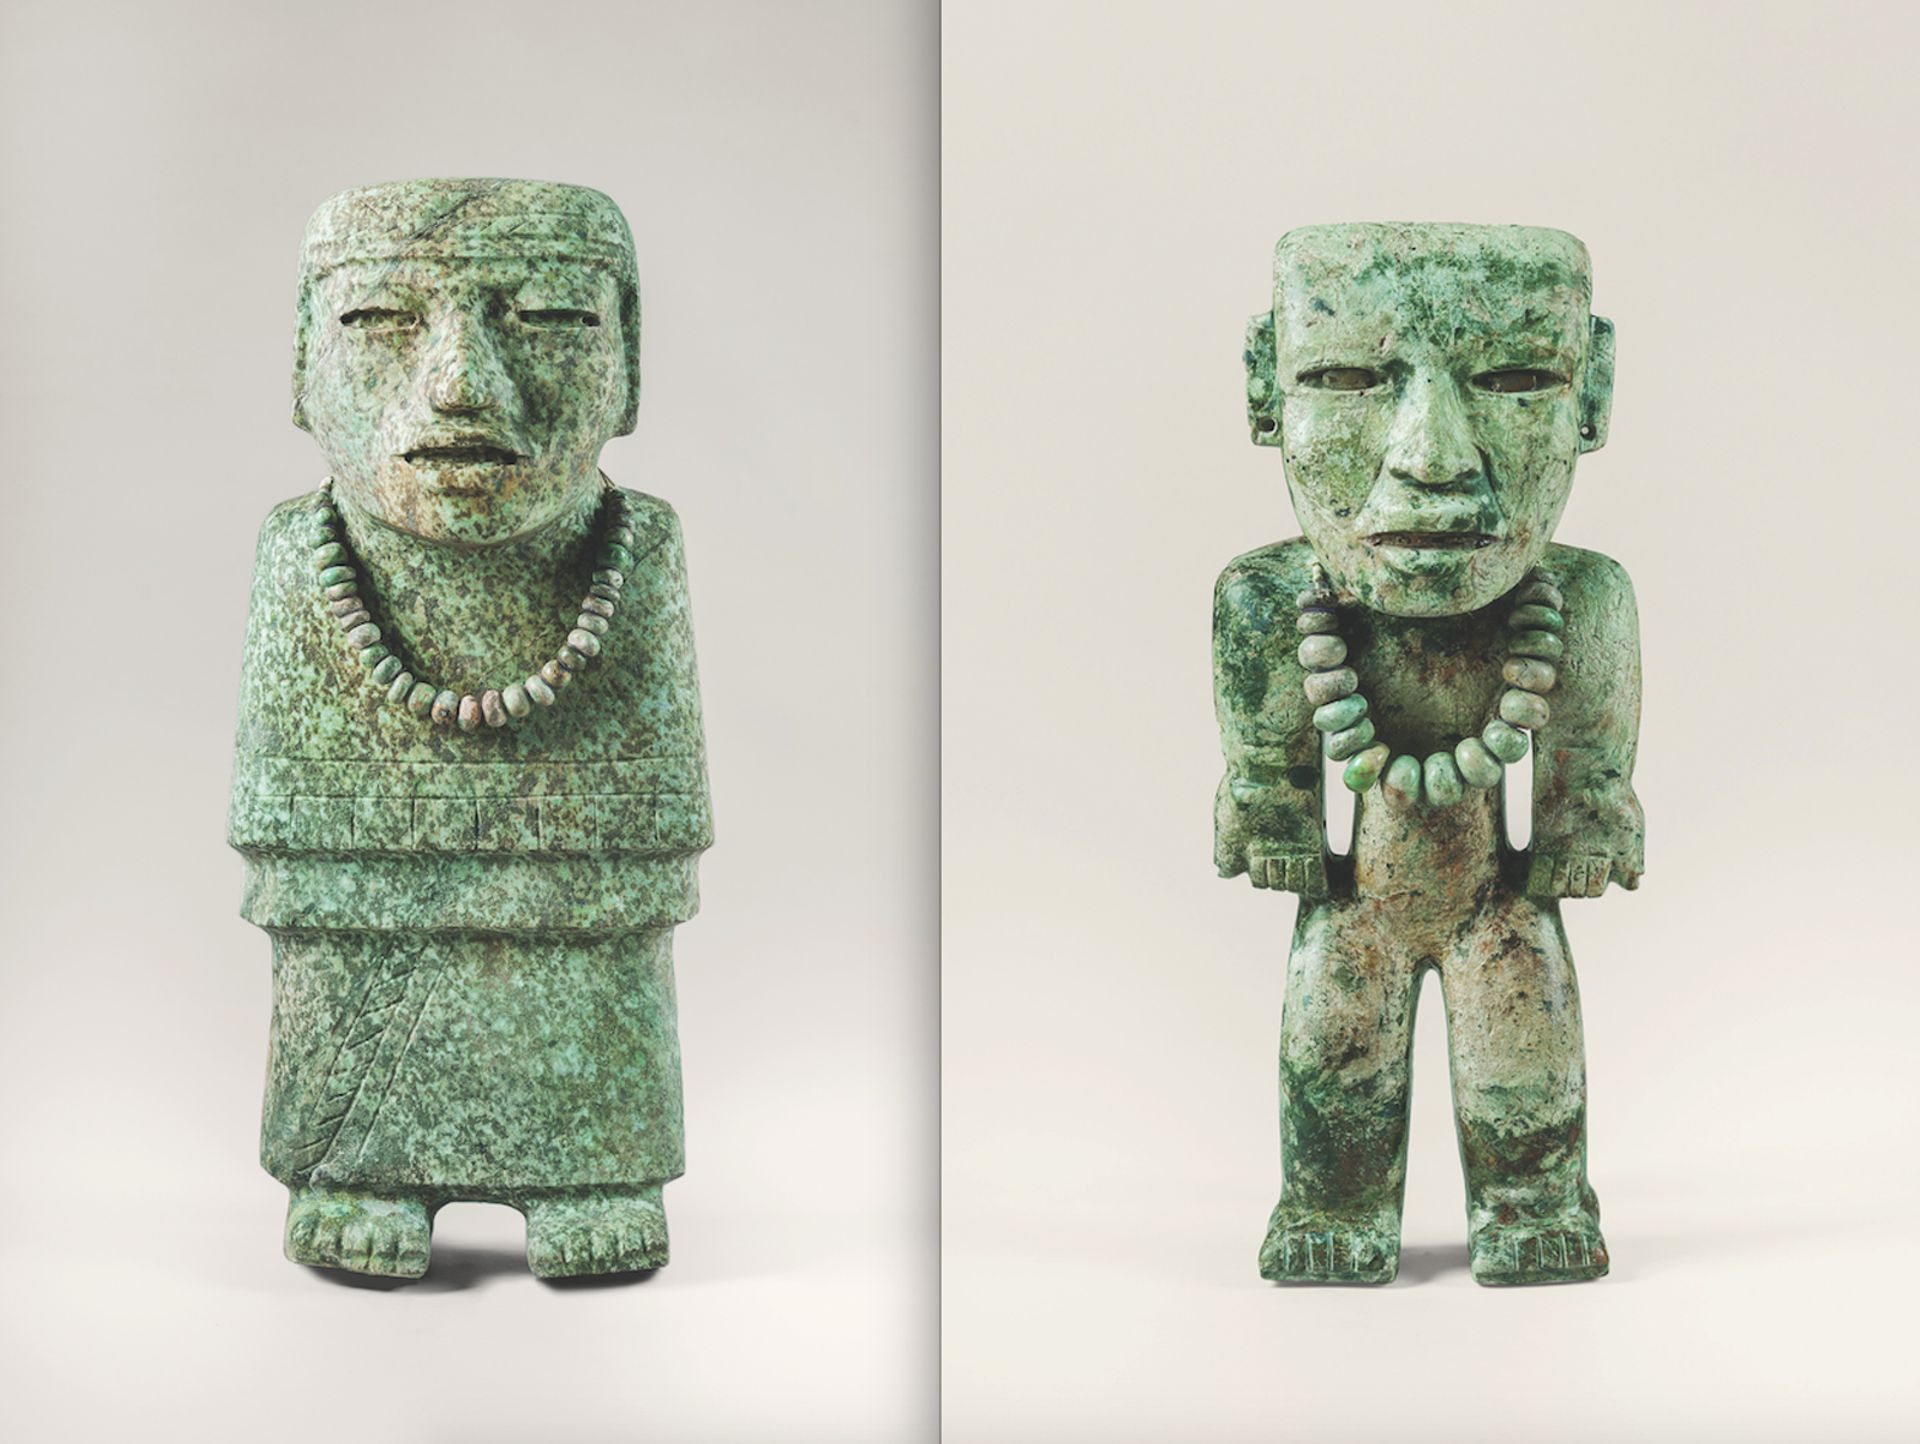 Two standing figures made from greenstone (Teotihuacan, AD200–AD250) INAH; Photo: Jorge Peréz de Lara Elías